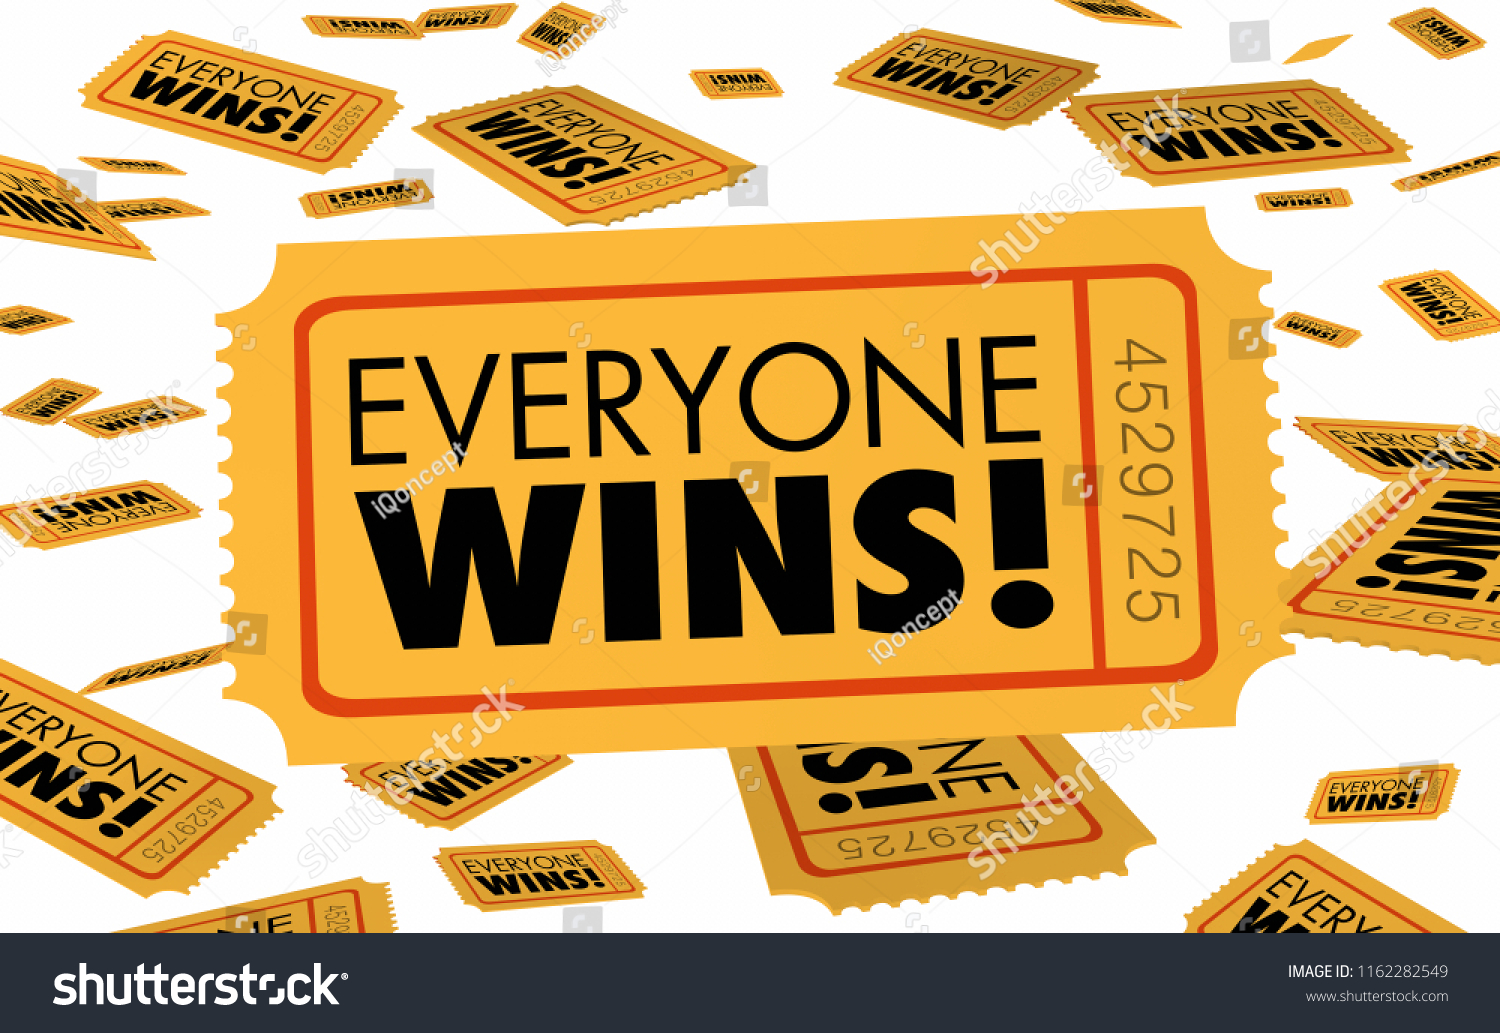 Everyone Wins Everybody Working Together Ticket Stock Illustration  1162282549